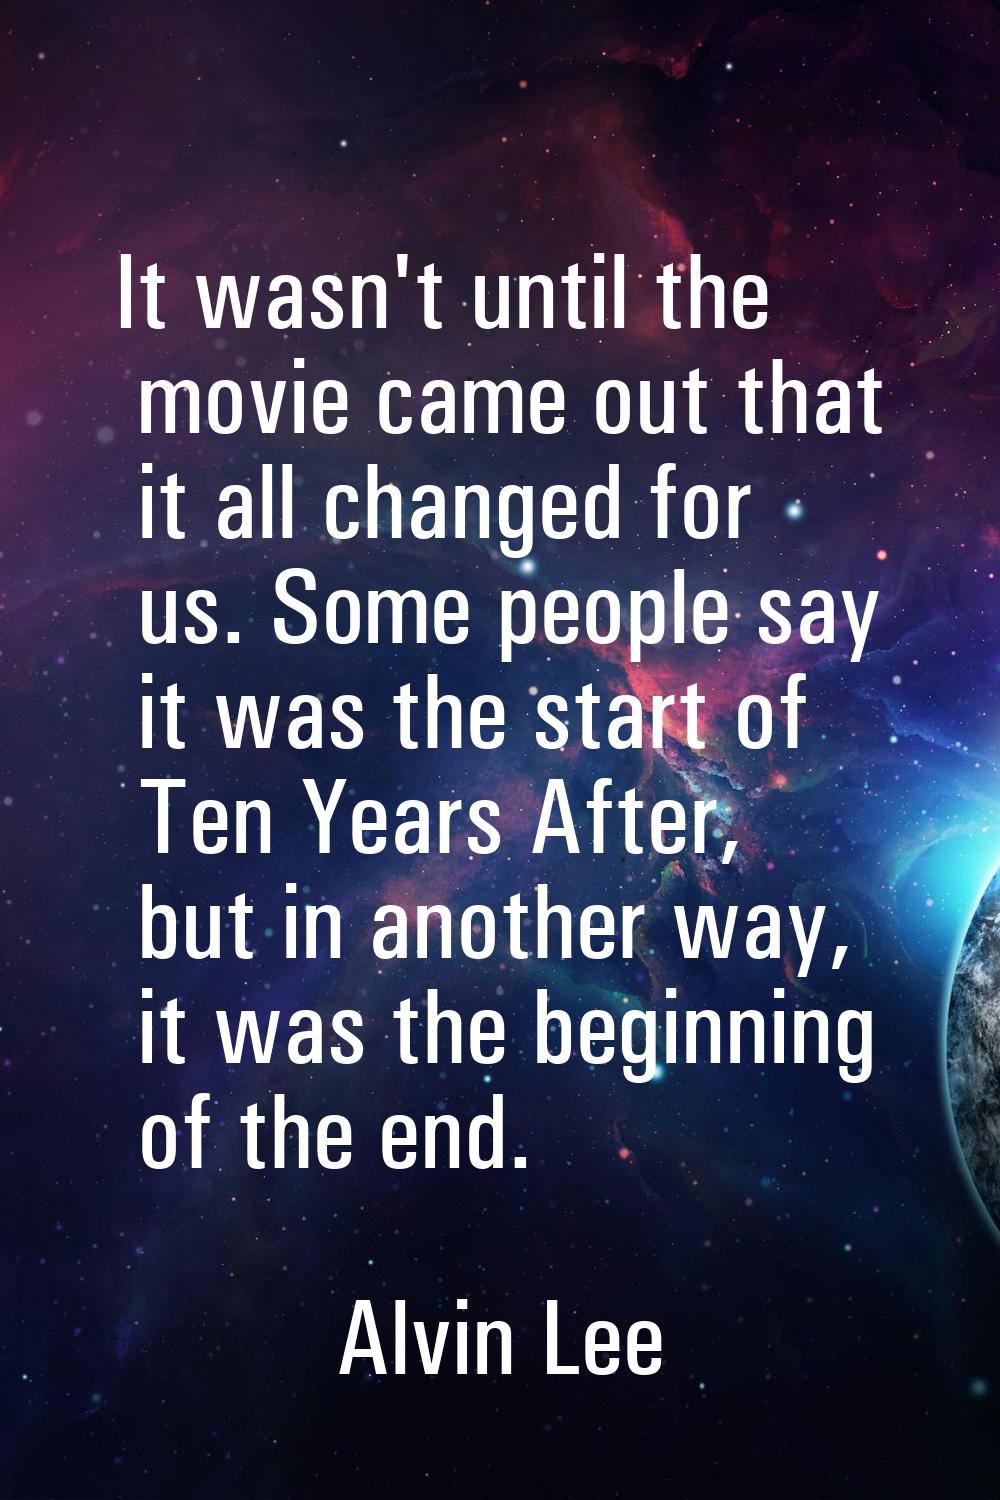 It wasn't until the movie came out that it all changed for us. Some people say it was the start of 